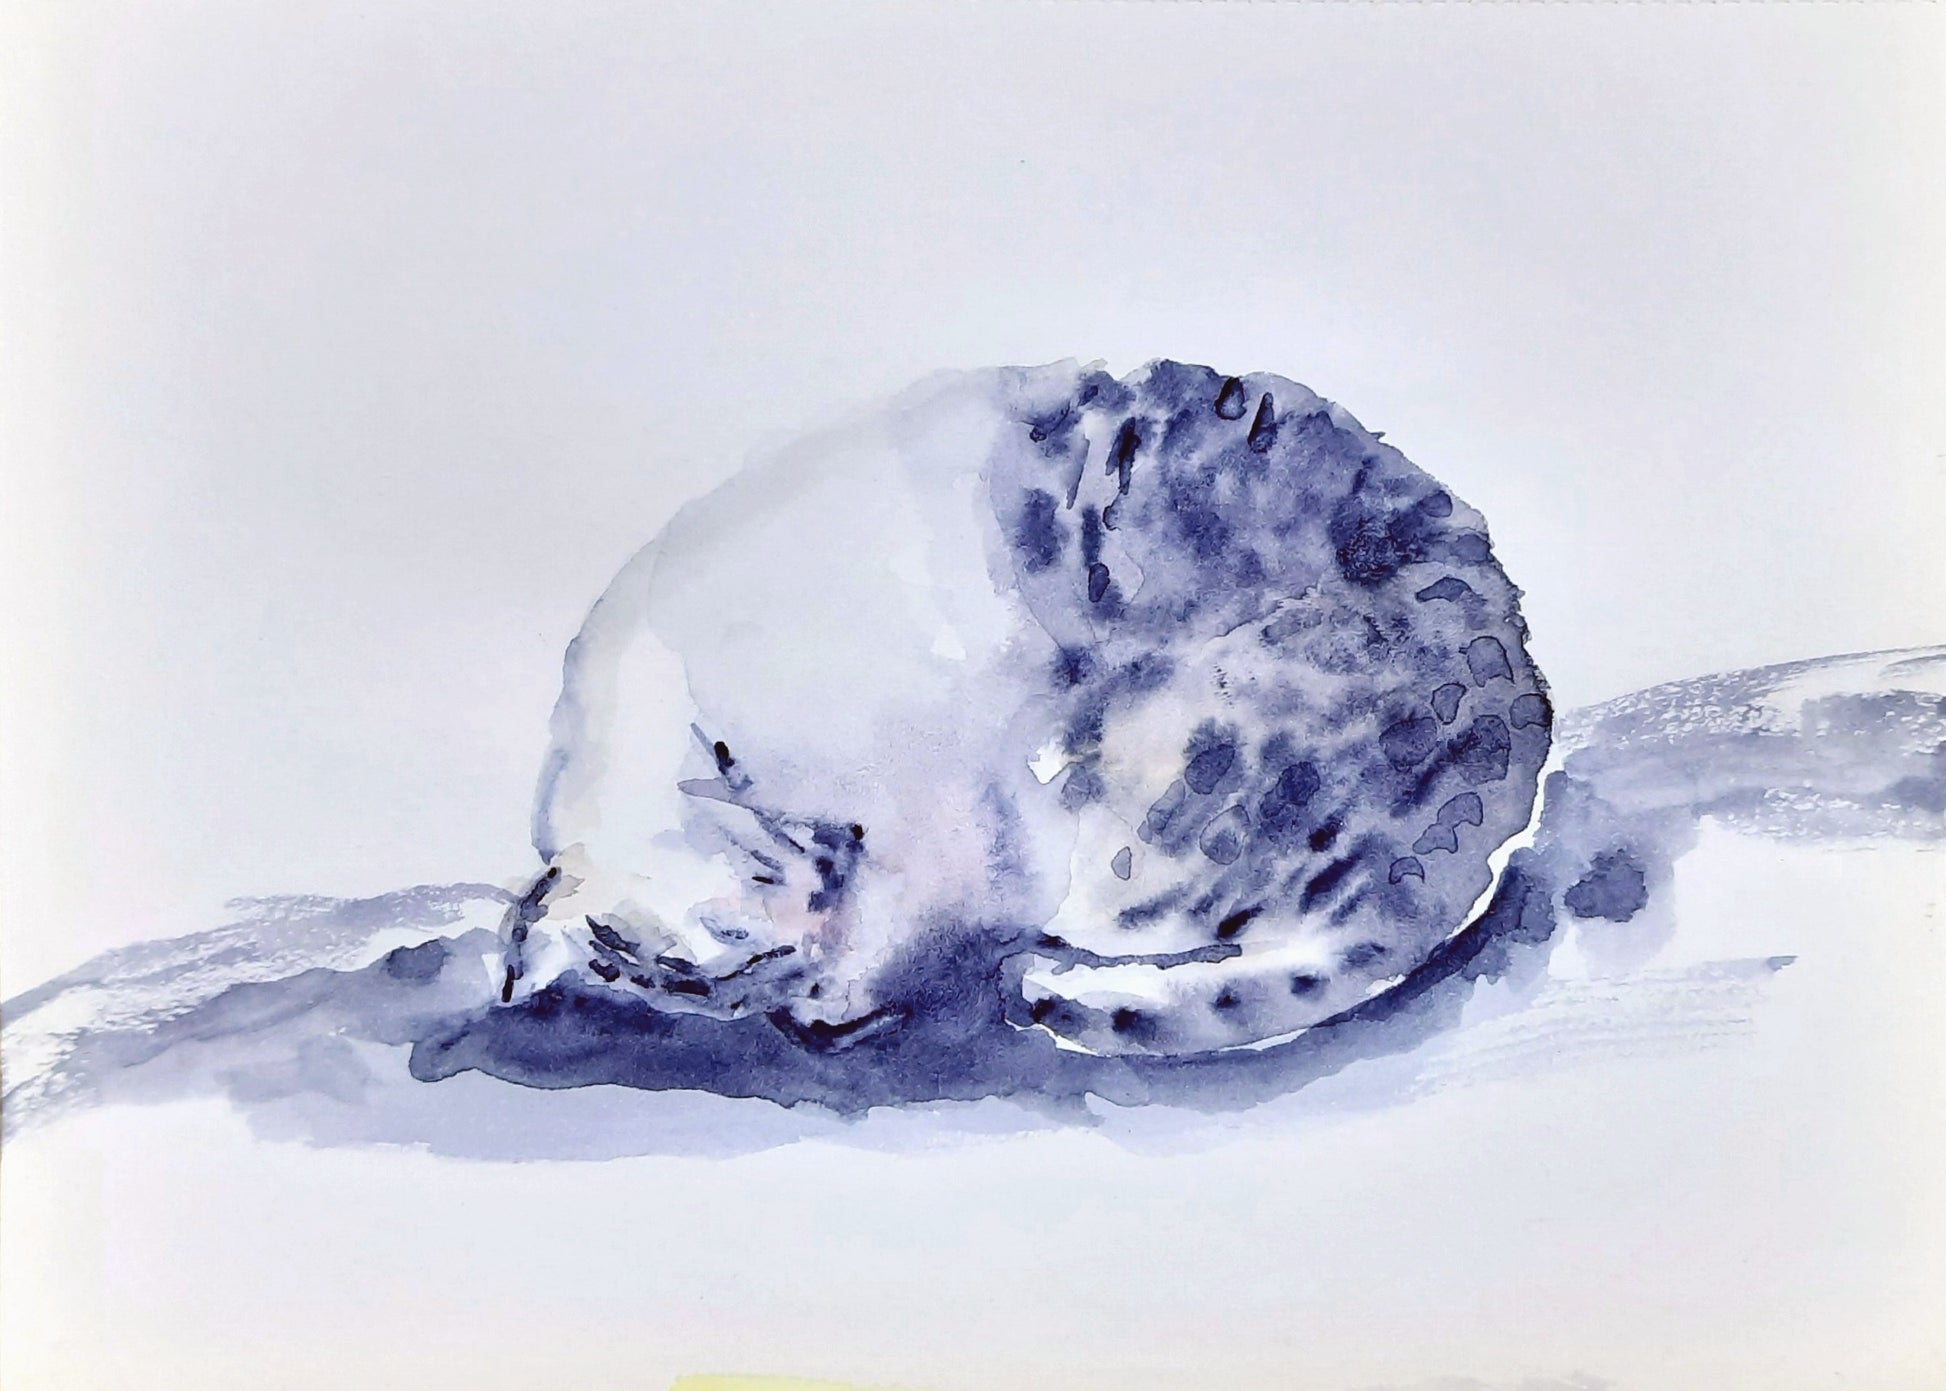 Sleeping cat watercolor painting on paper